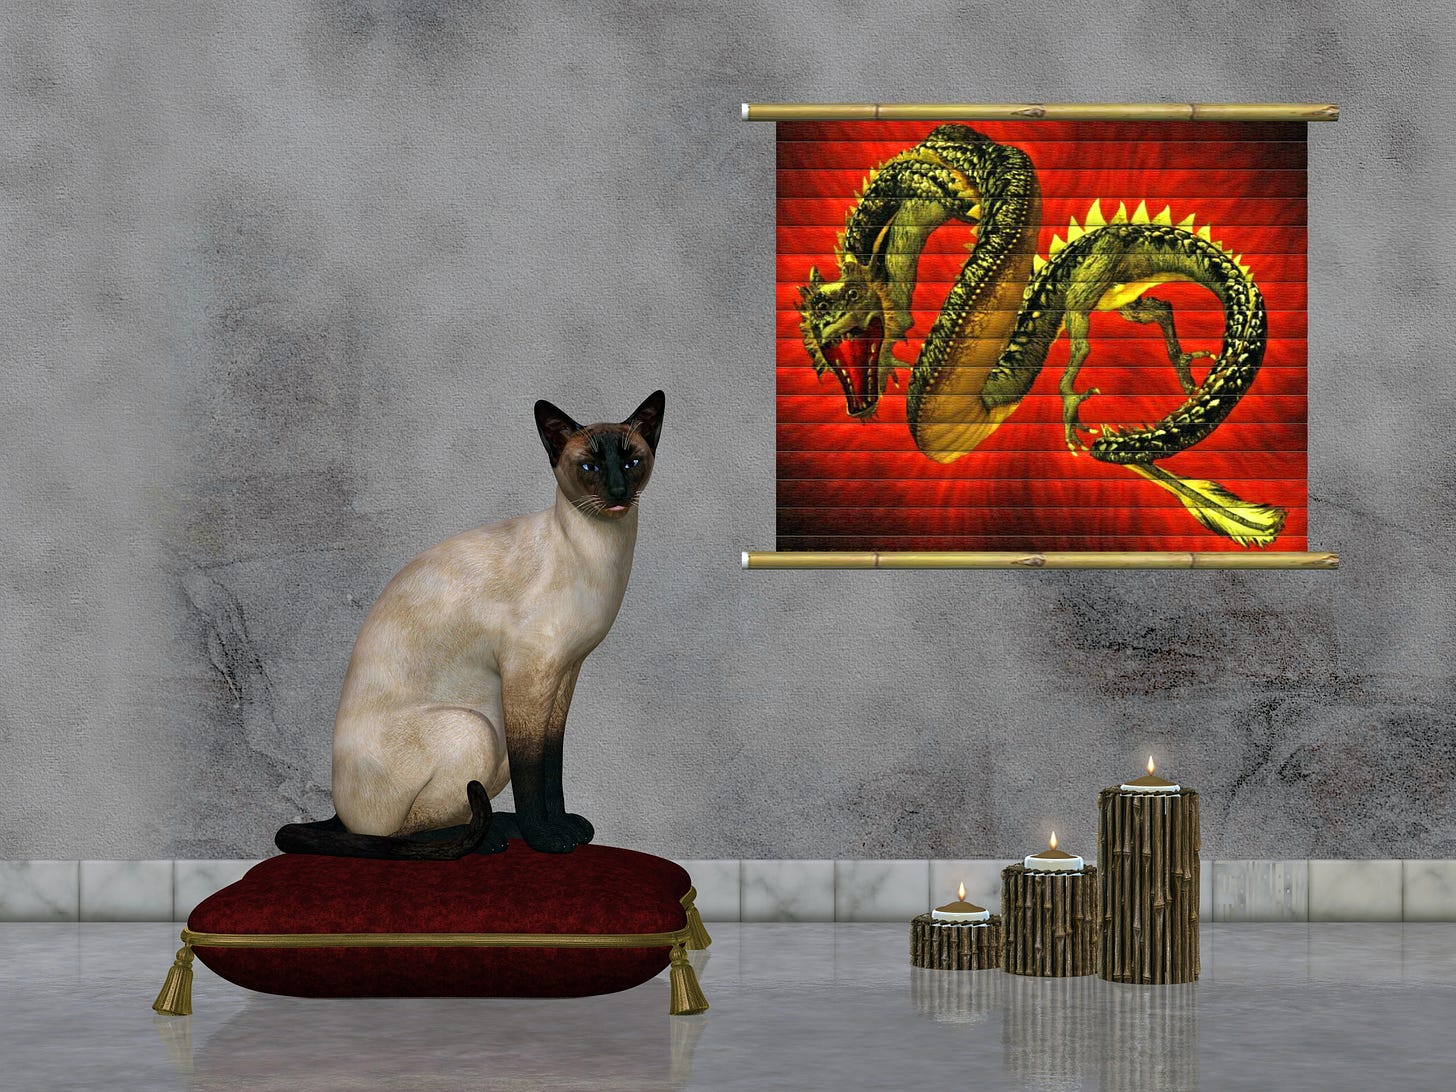 Siamese cat on a cushion beside a red banner featuring a dragon